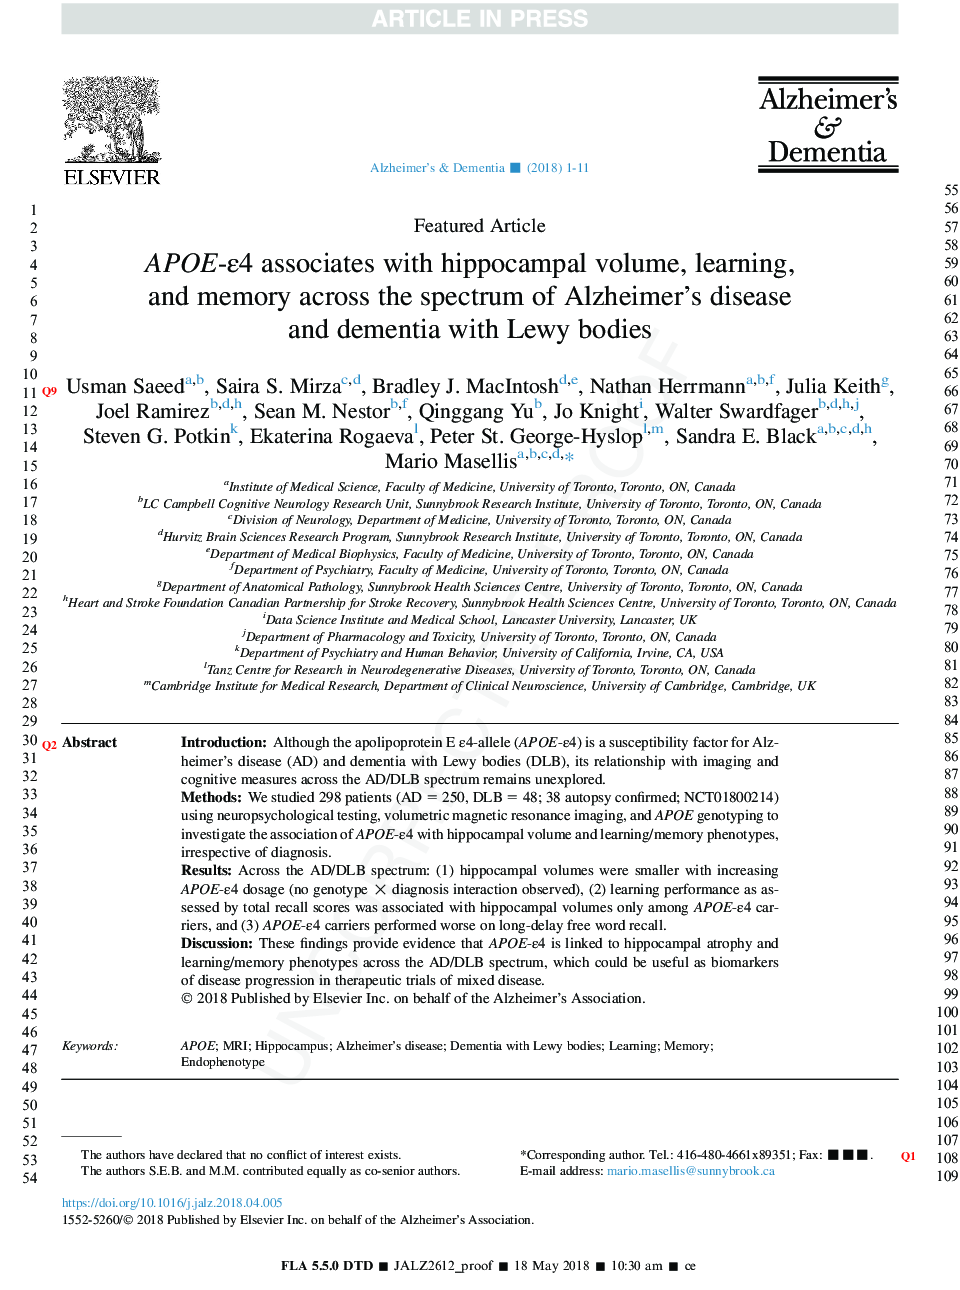 APOE-Îµ4 associates with hippocampal volume, learning, and memory across the spectrum of Alzheimer's disease and dementia with Lewy bodies